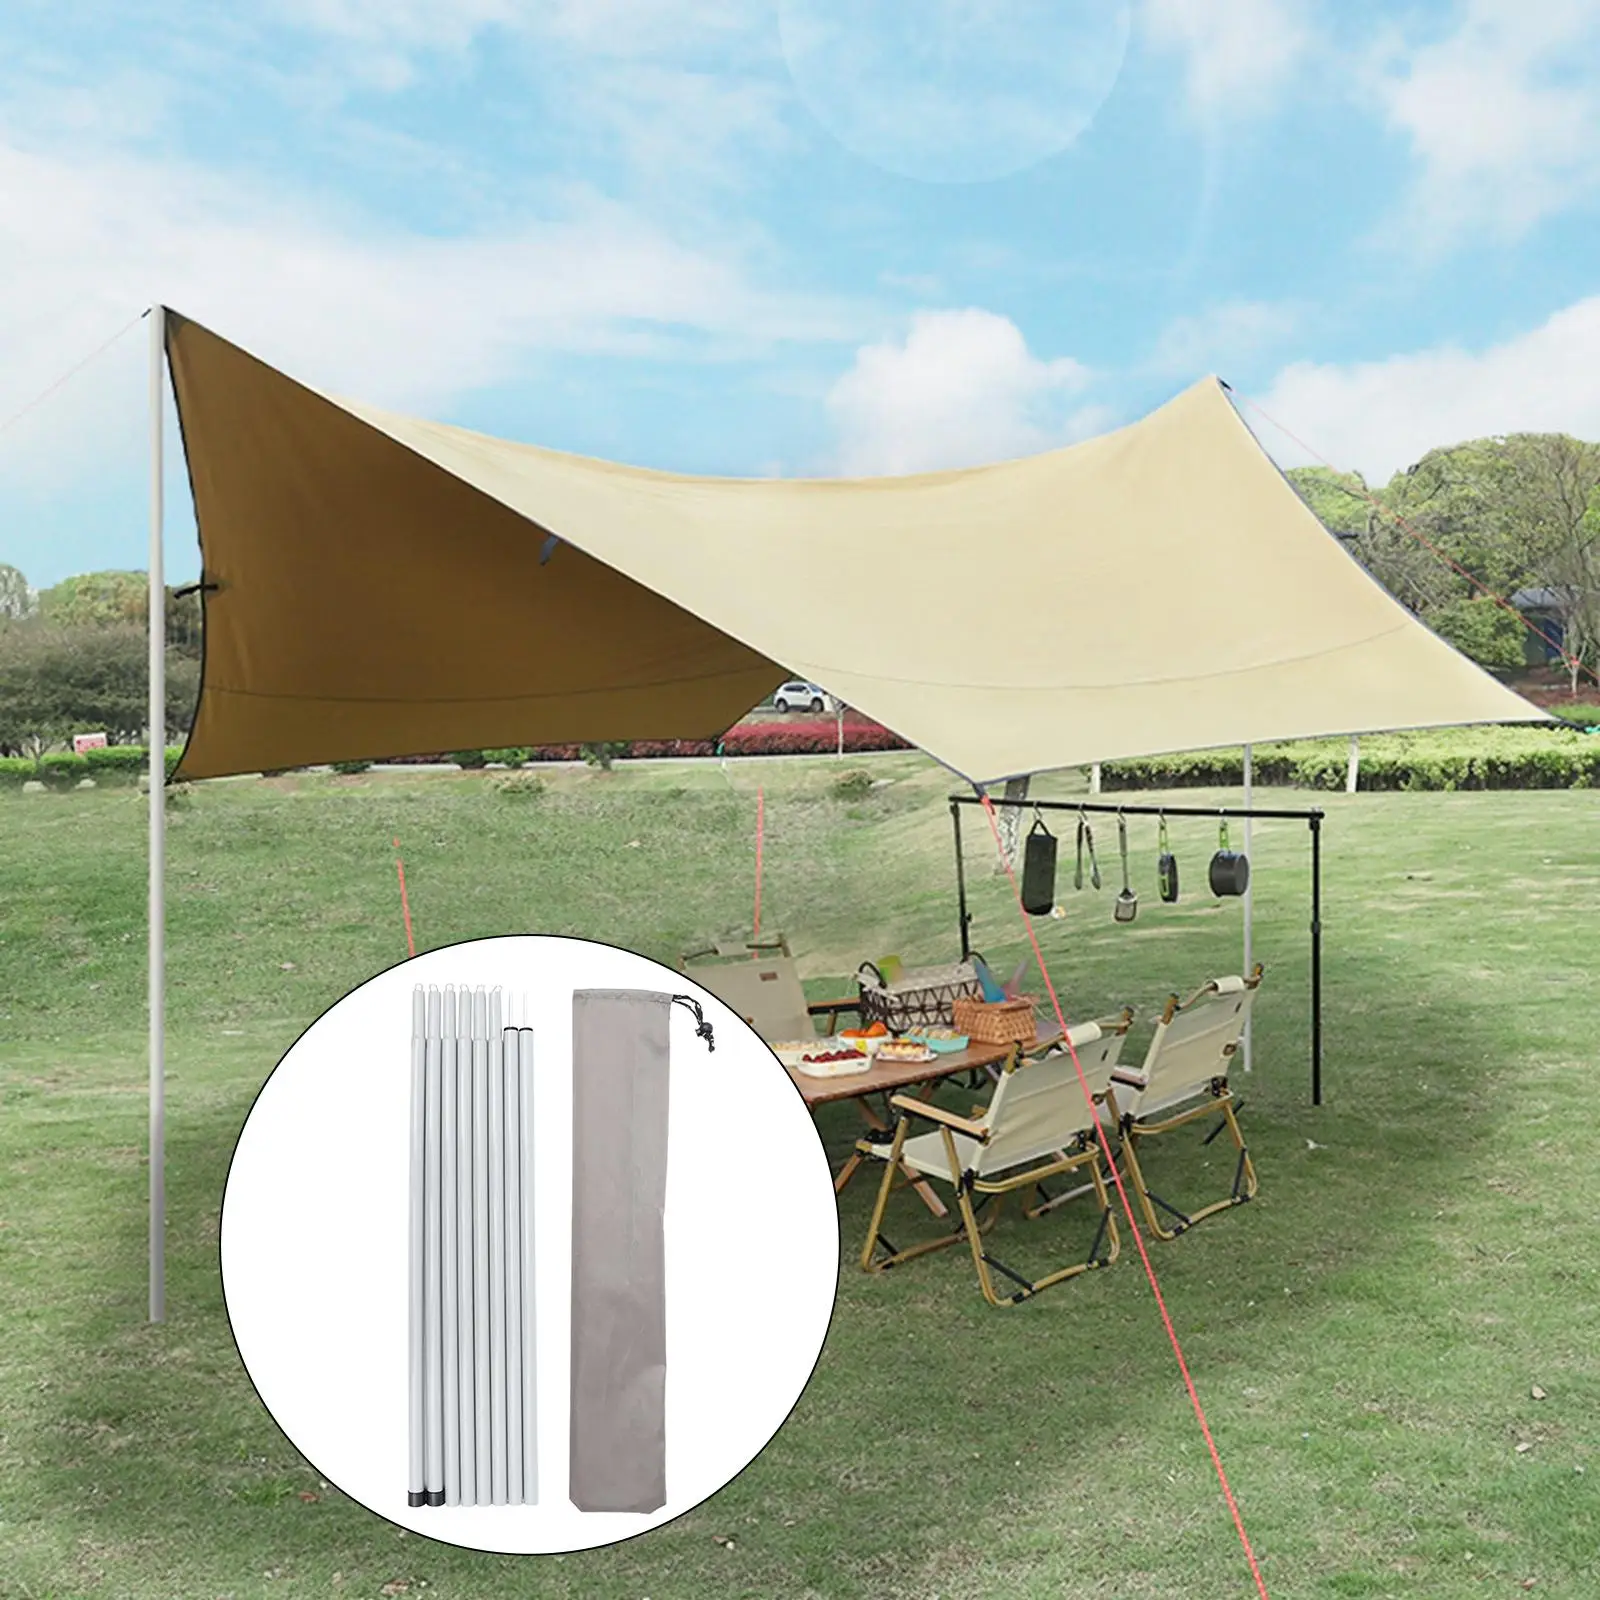 Adjustable Tarp Poles Iron Awning Support Pole with Storage Bag Lightweight Support Rods for Camping Awning Rod Holder